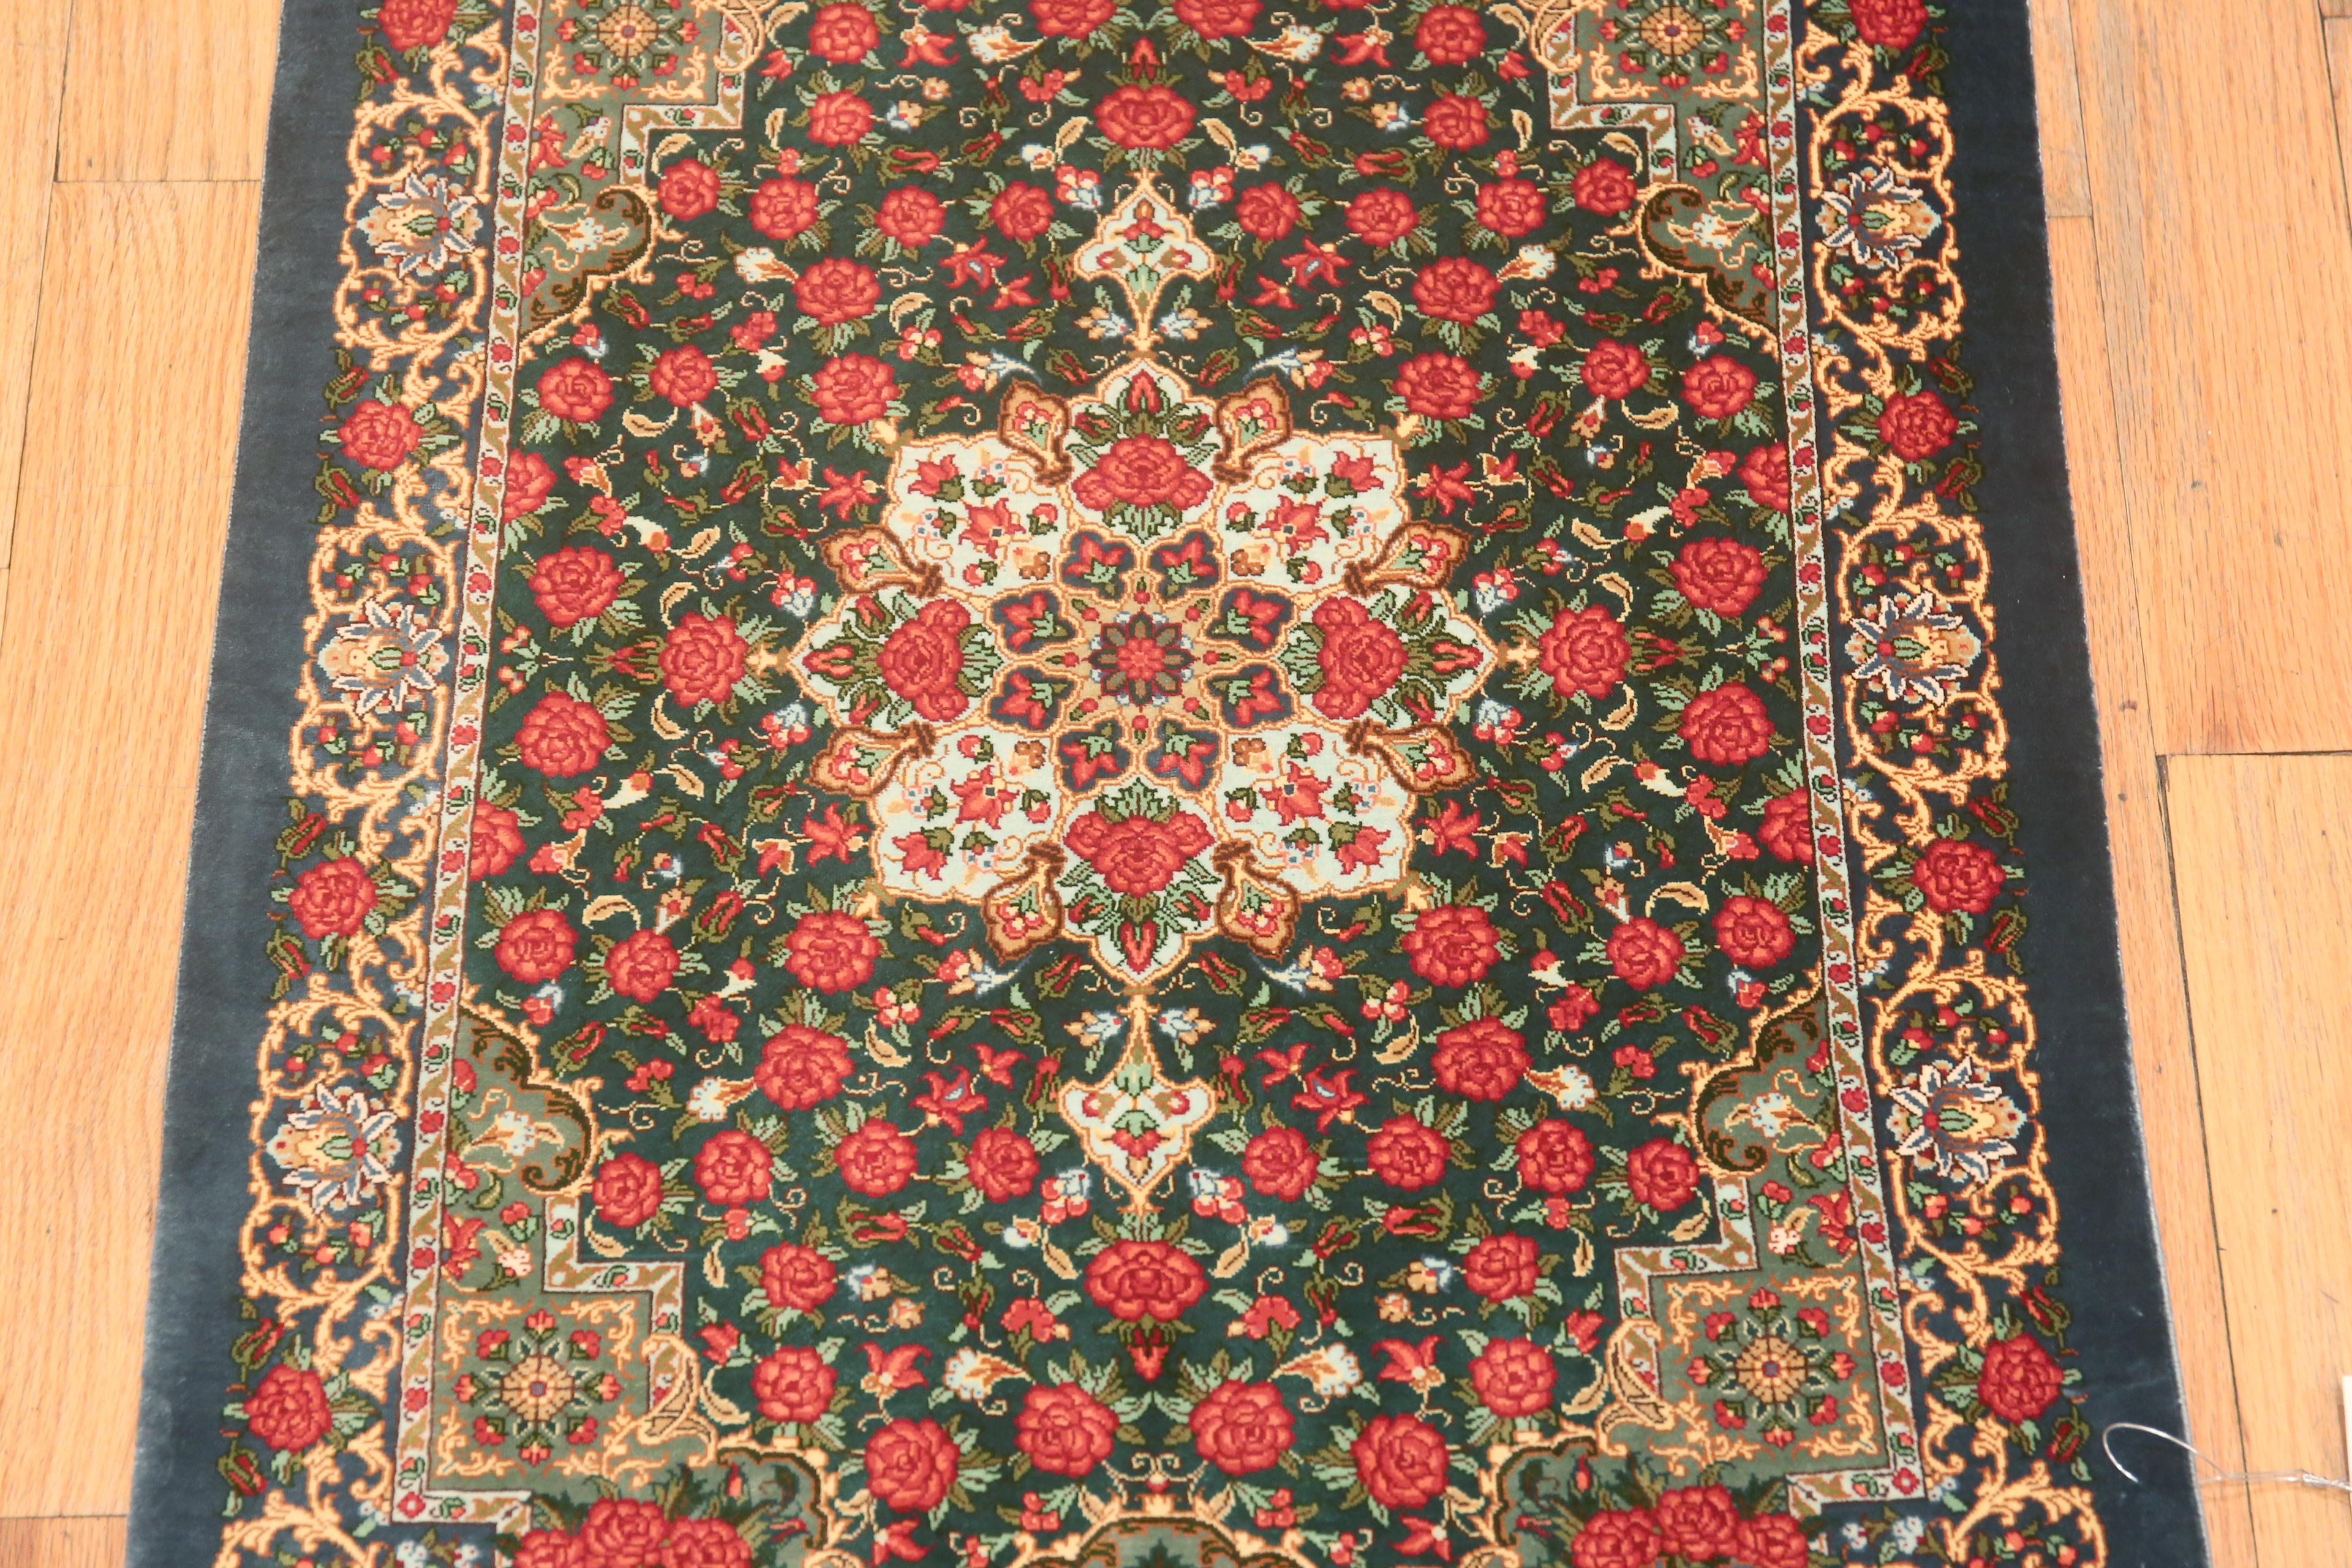 Fine Small Green Floral Vintage Persian Silk Qum Rug 2' x 3' For Sale 3